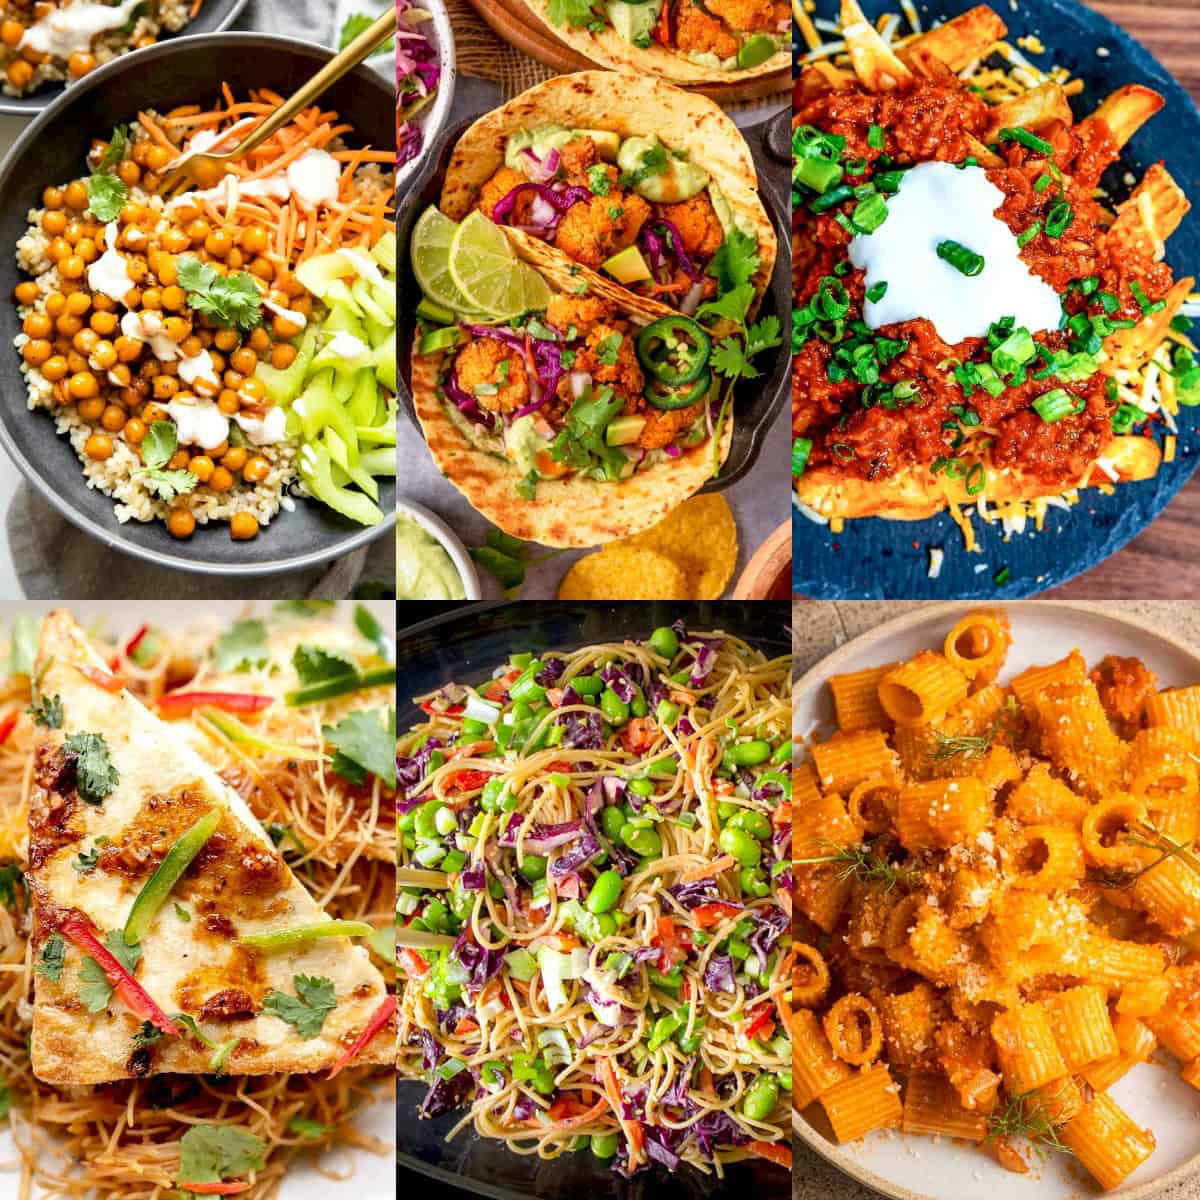 Spicy Vegetarian Recipes: A Roundup for Spice Lovers